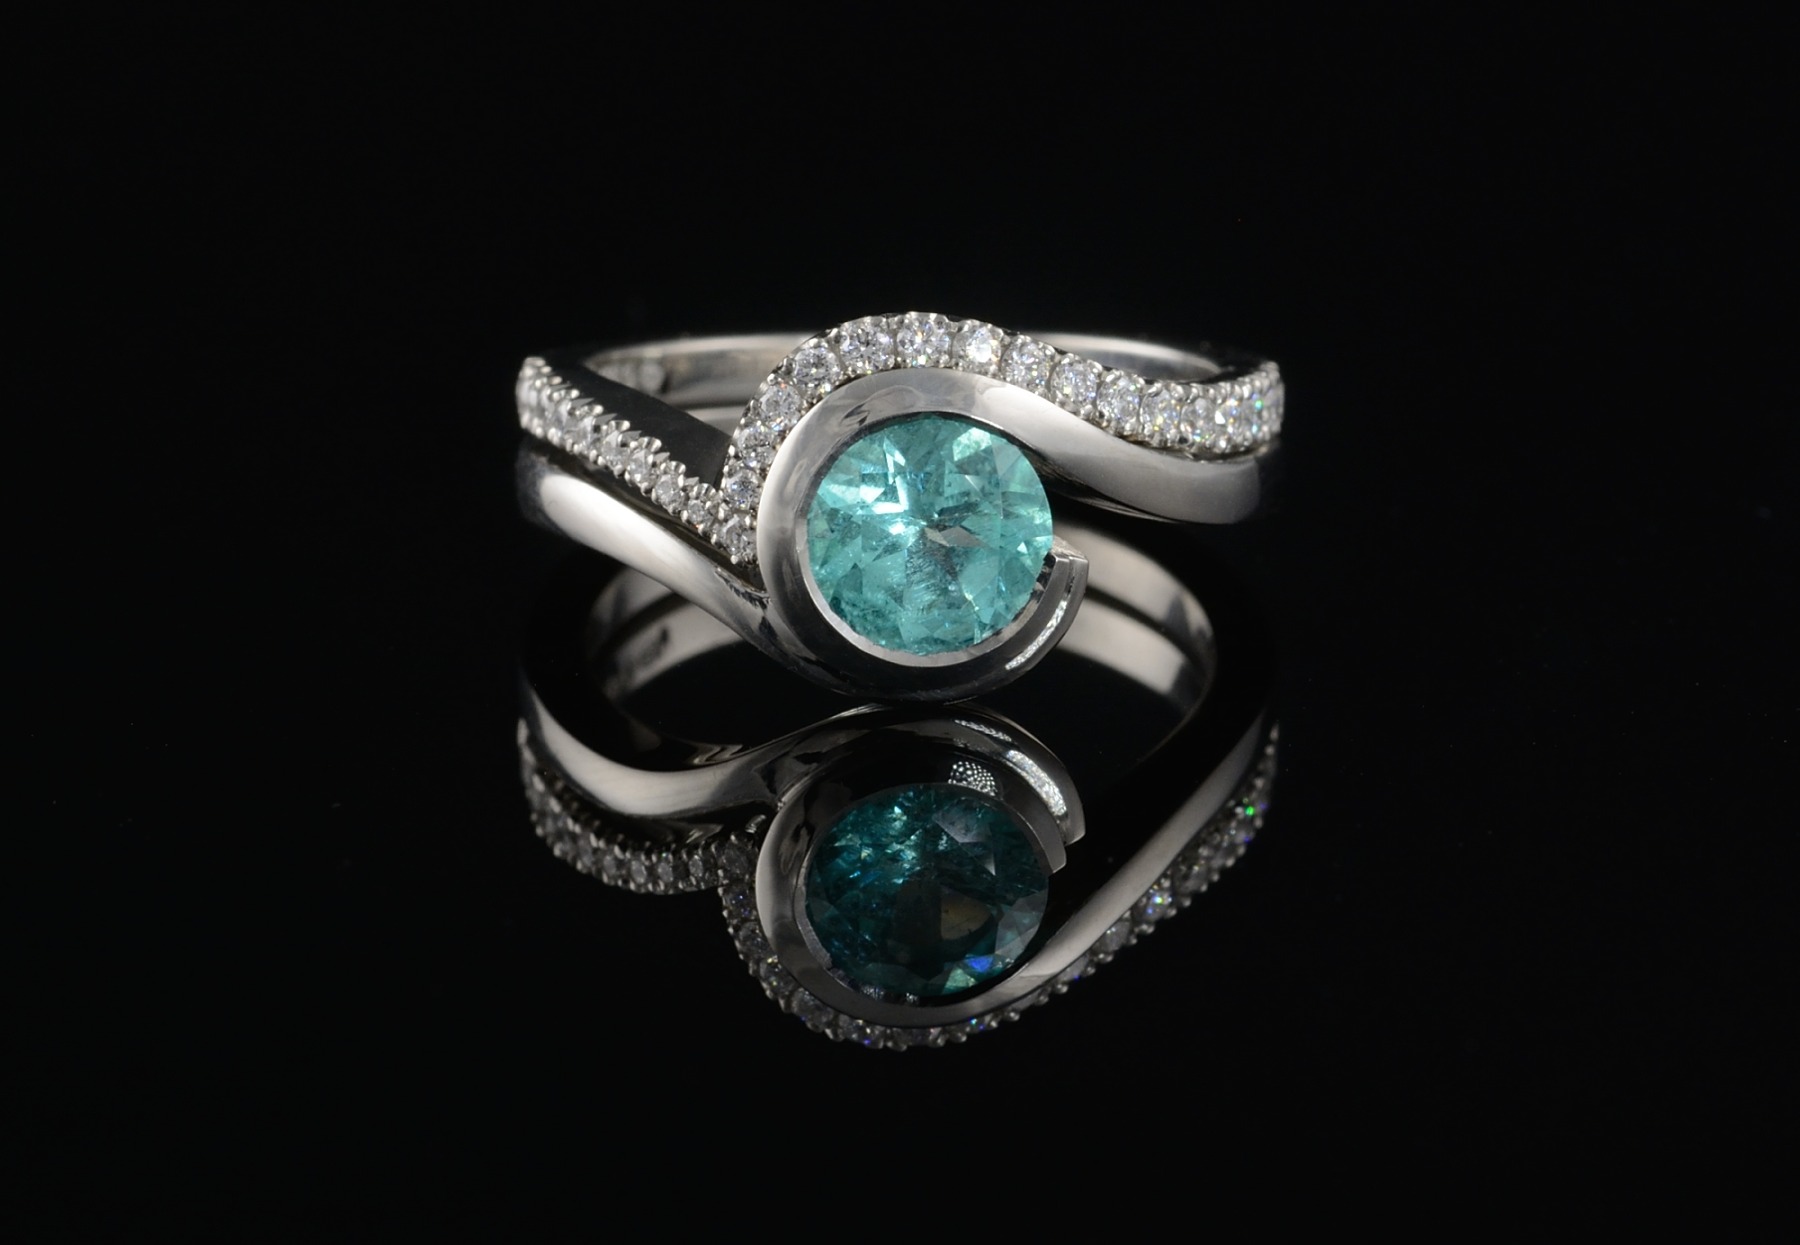 Paraiba tourmaline and platinum-wave engagement ring inspired by the sea